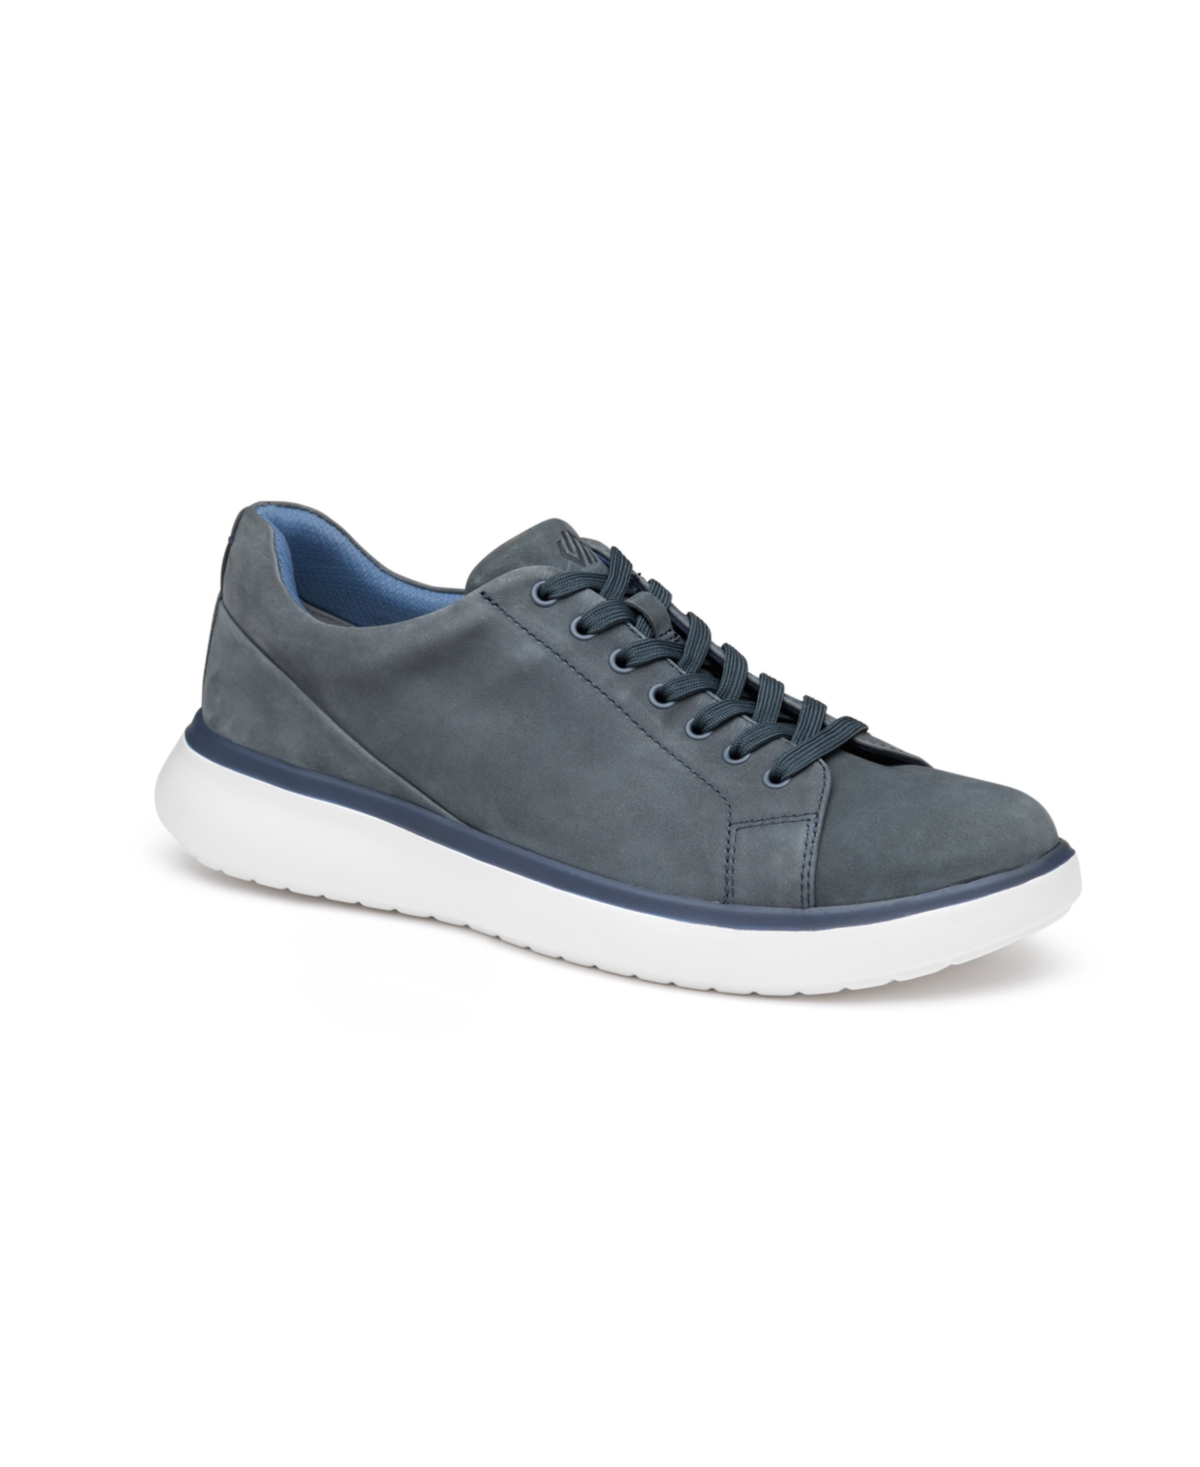 Men's Oasis Lace-To-Toe Sneakers - Navy